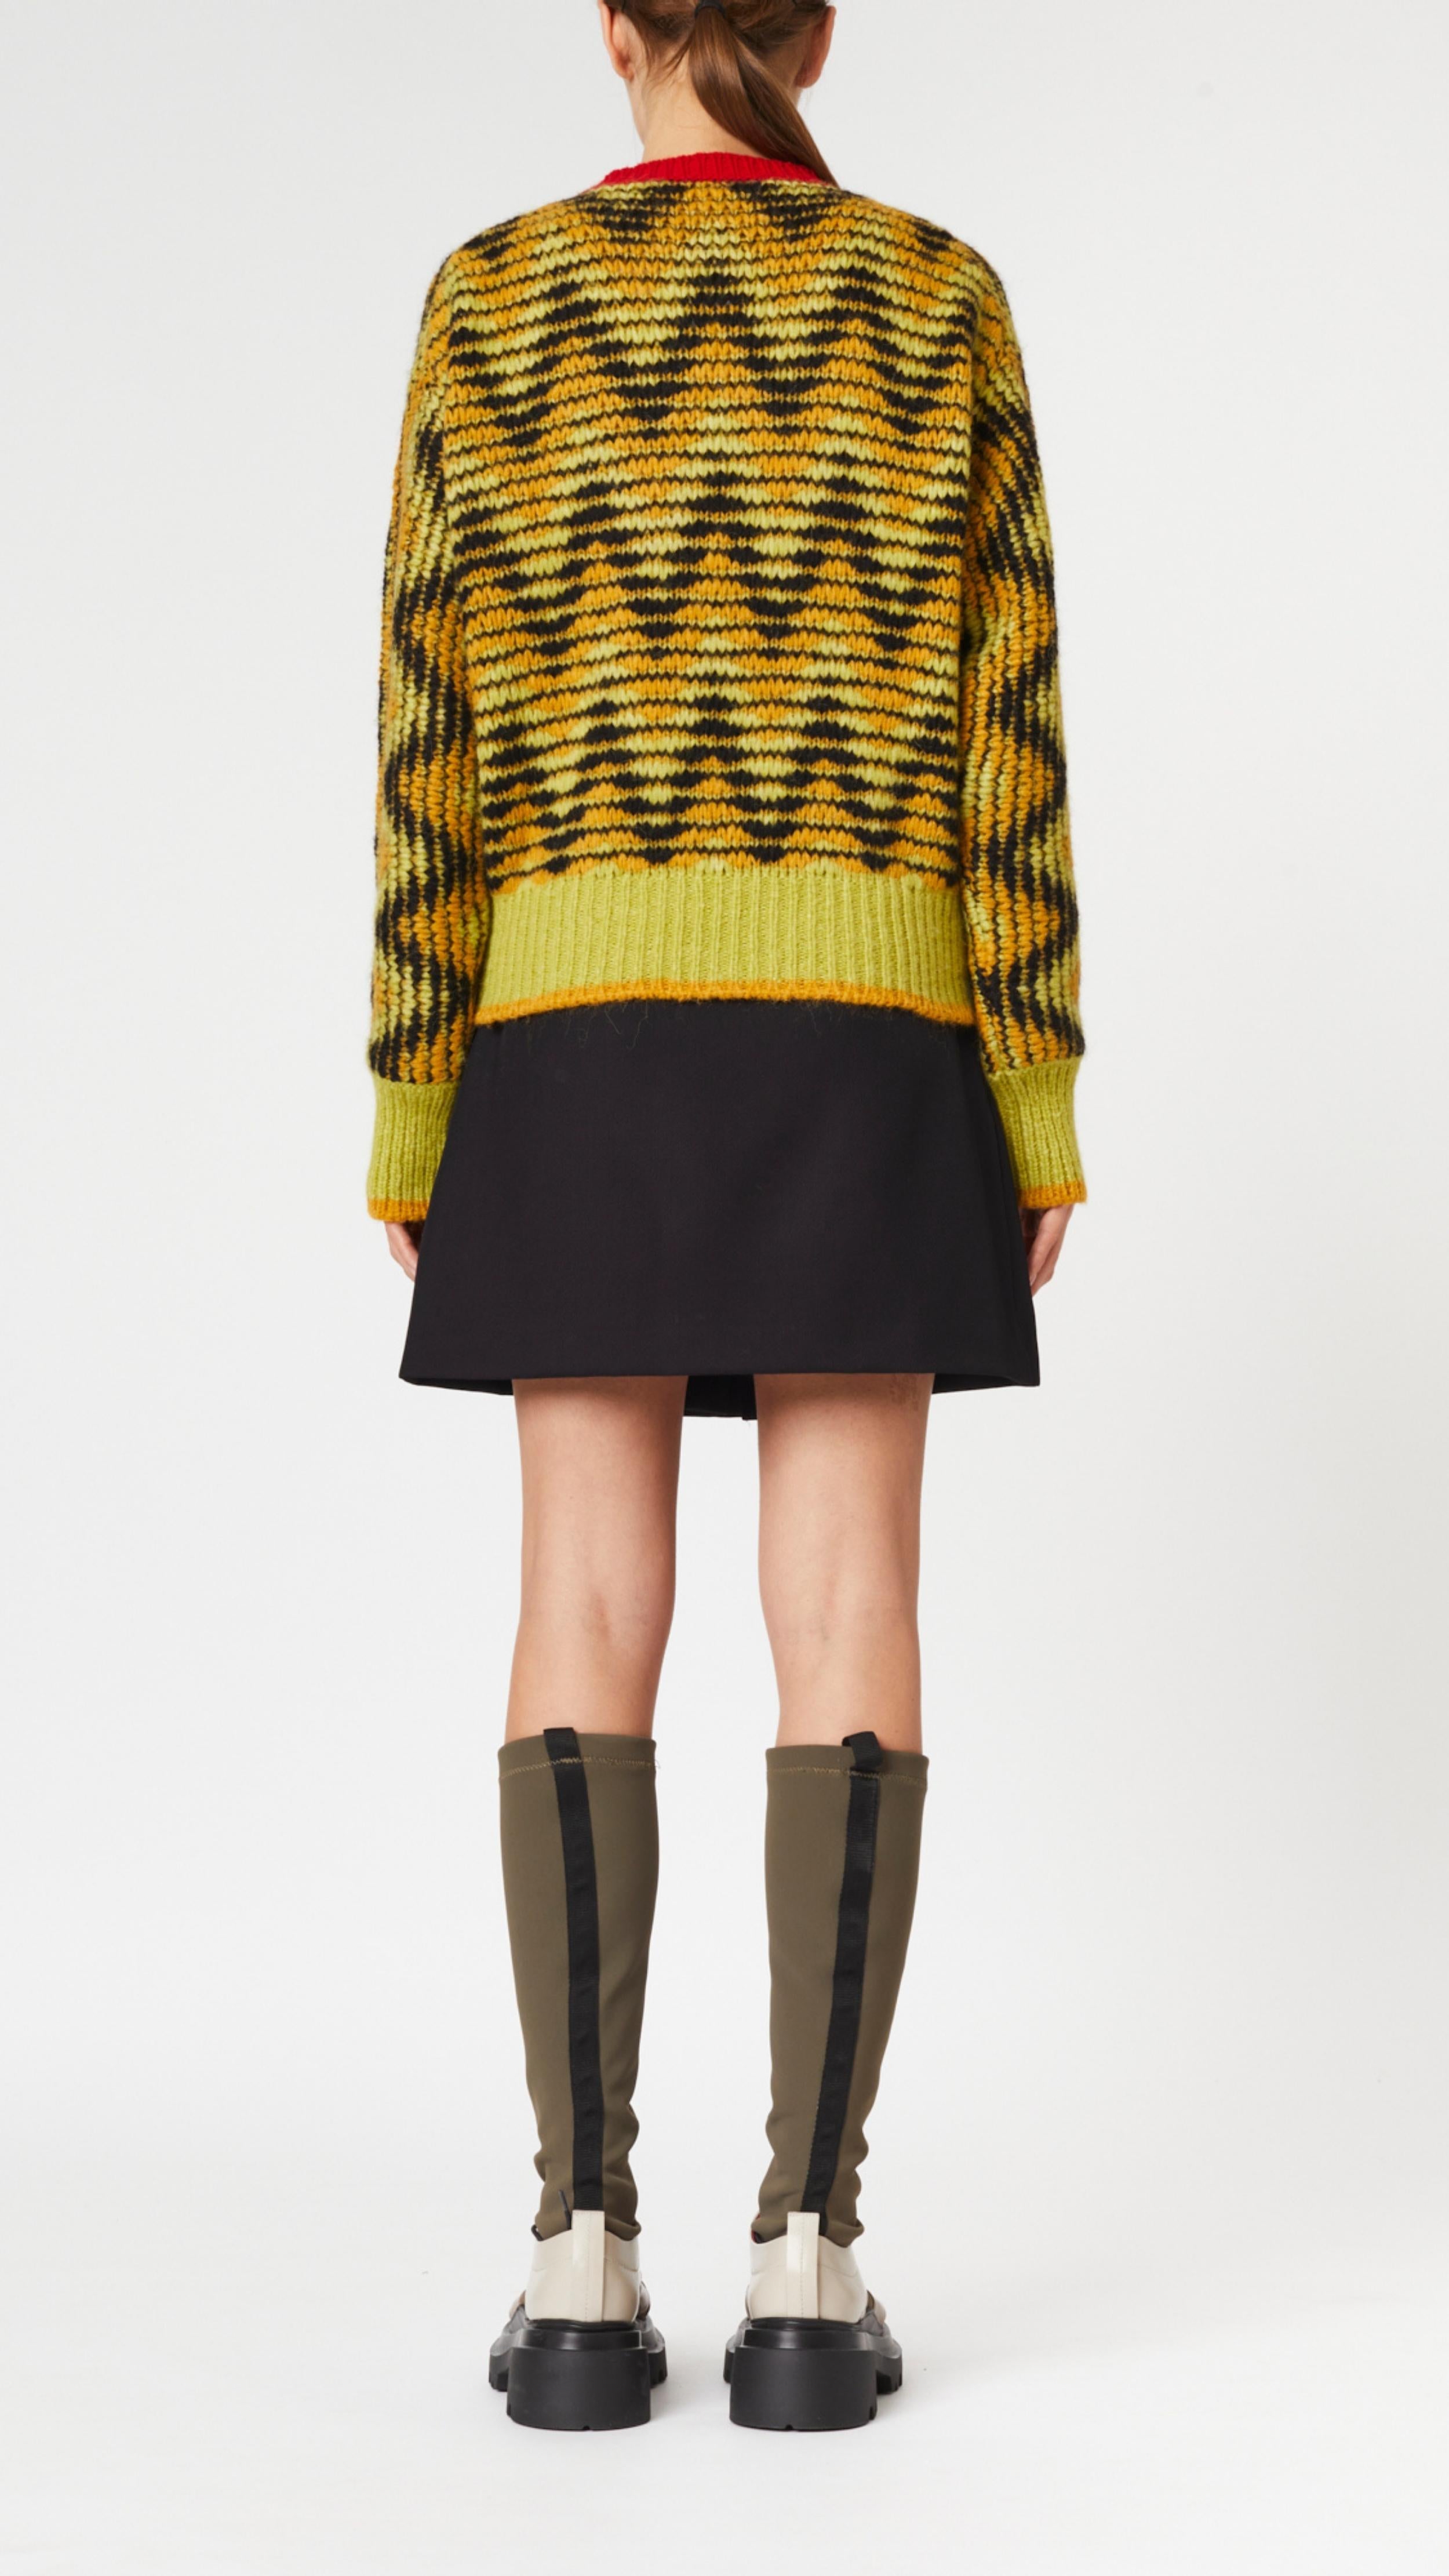 Plan C Long Sleeve Jacquard Knit Sweater.Ppistachio, black and ochre colors in a V chevron print. Red pop of color at the collar. Photo shown on model facing to the back..